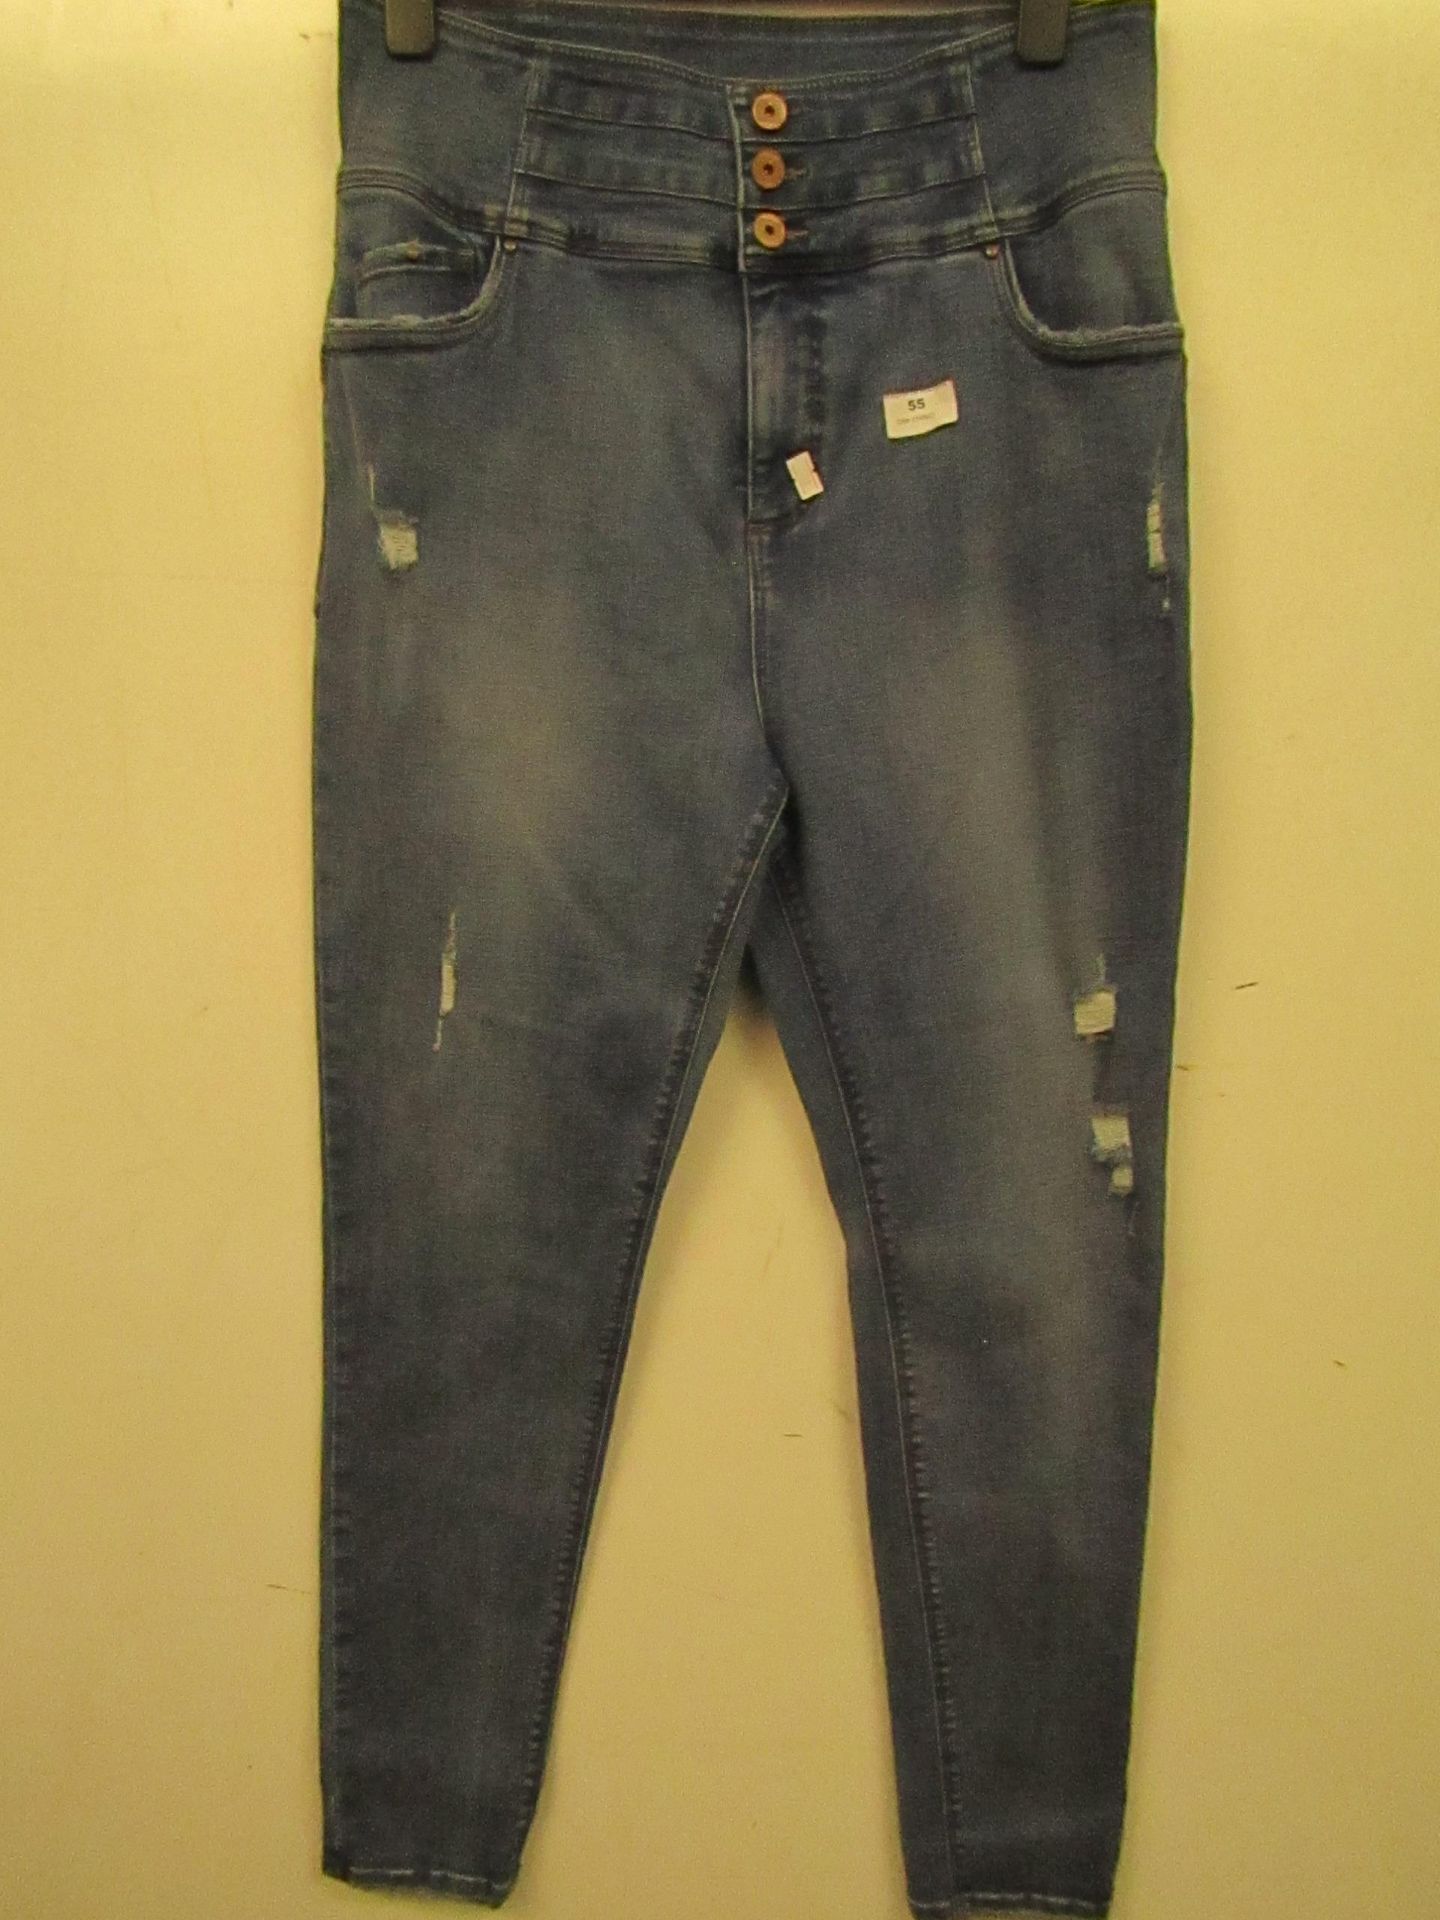 1 x Shapr N Sculpt Skinny Jeans size 18 new (sample) see image